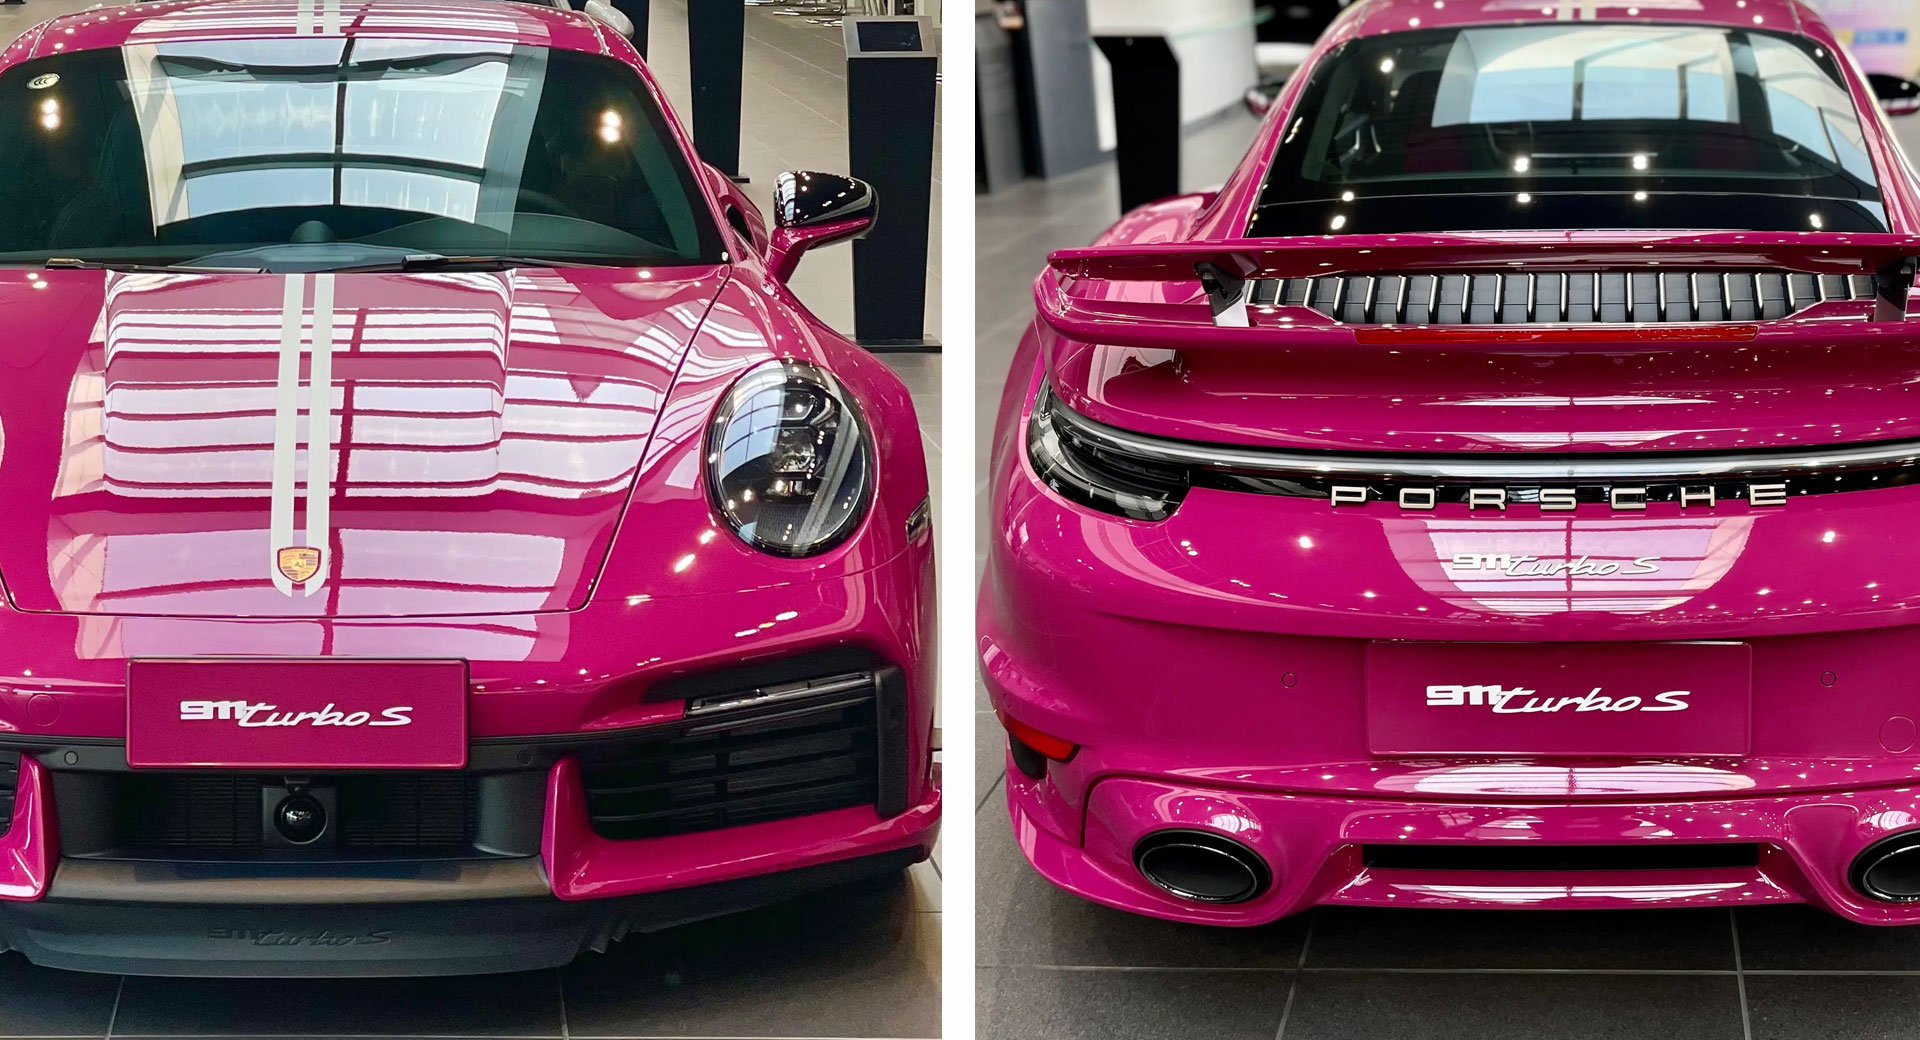 2022 Porsche 911 Turbo S In Ruby Star Proves Pink Can Be Cool